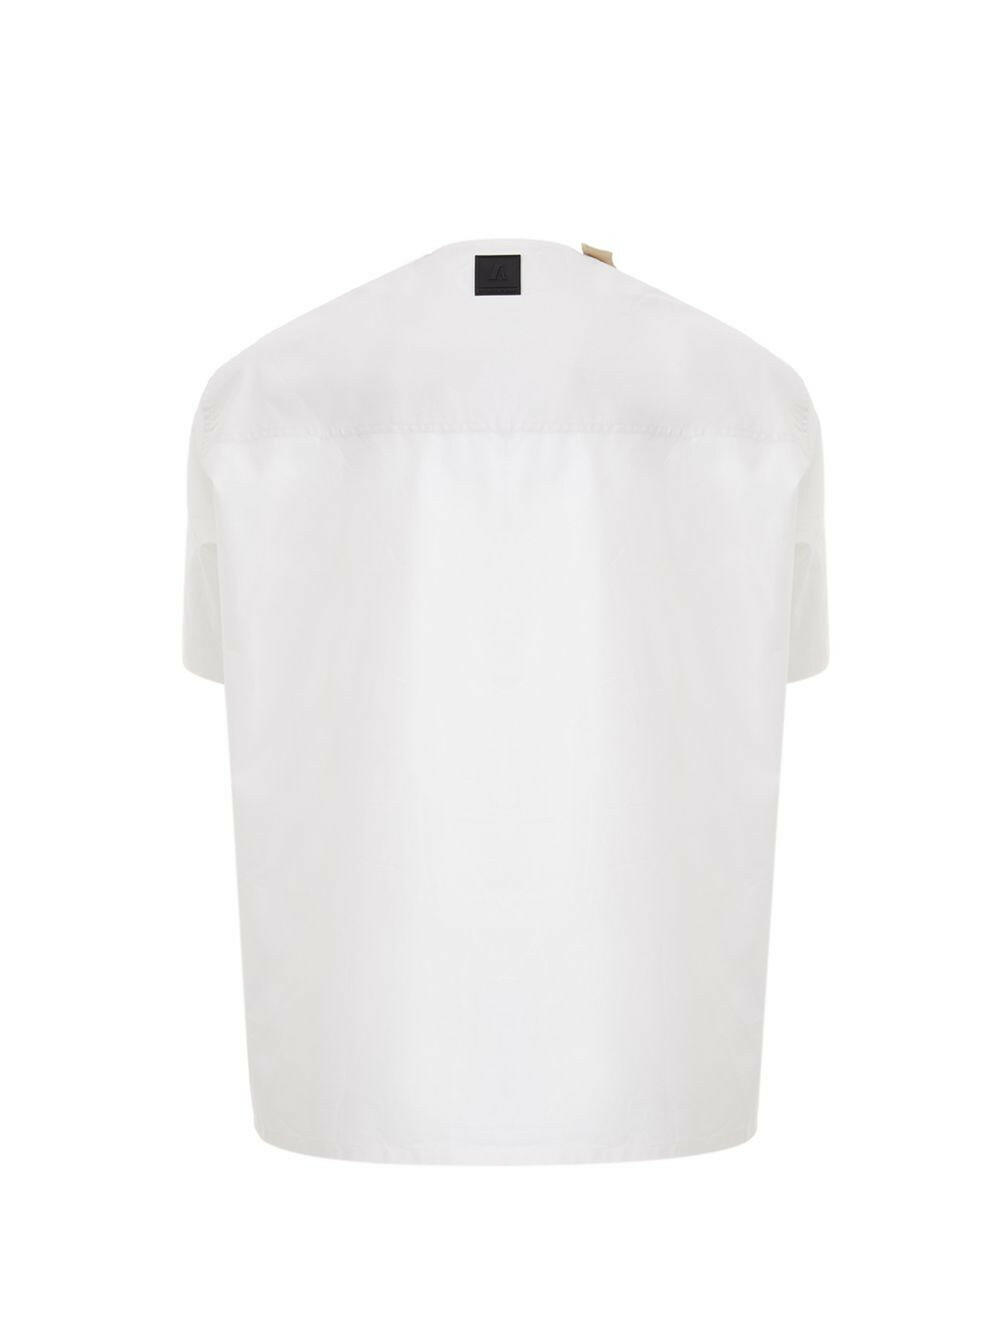 Emporio Armani Oversized White T-Shirt with Side Closure - GENUINE AUTHENTIC BRAND LLC  